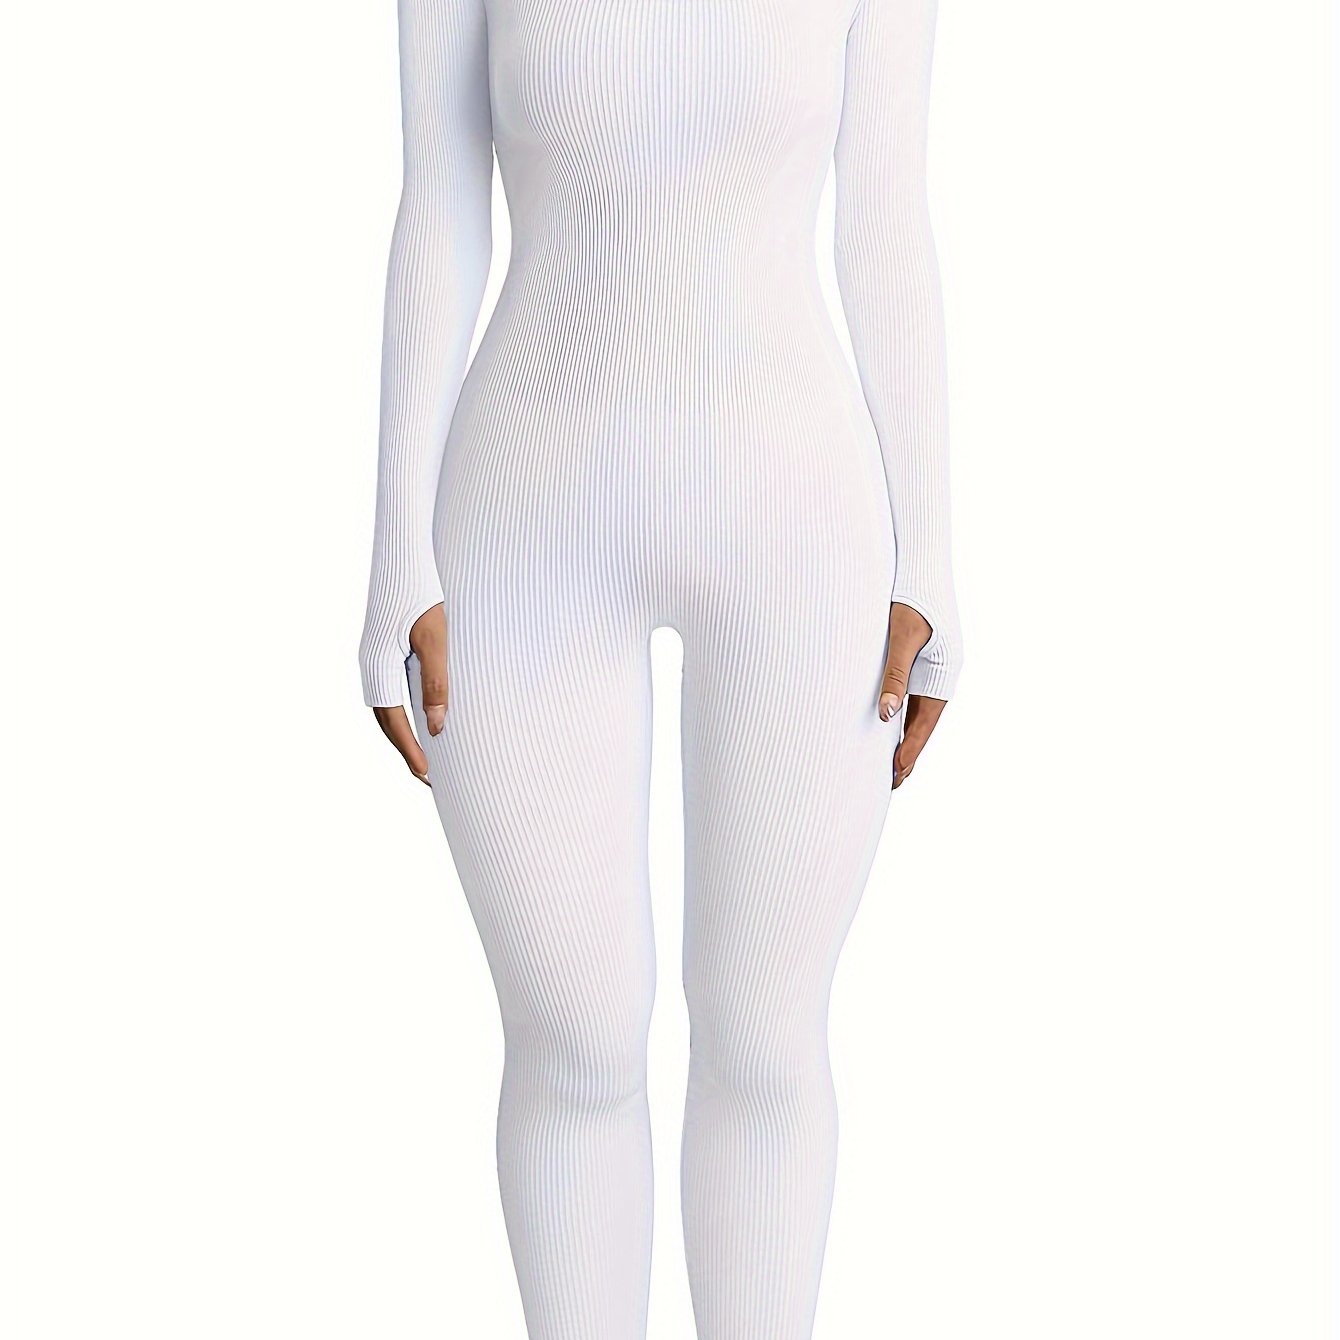 High-Stretch Women's Yoga Bodysuit with Thumb Holes - Easy-Care, All-Seasons Activewear, Square Neck Slim Fit